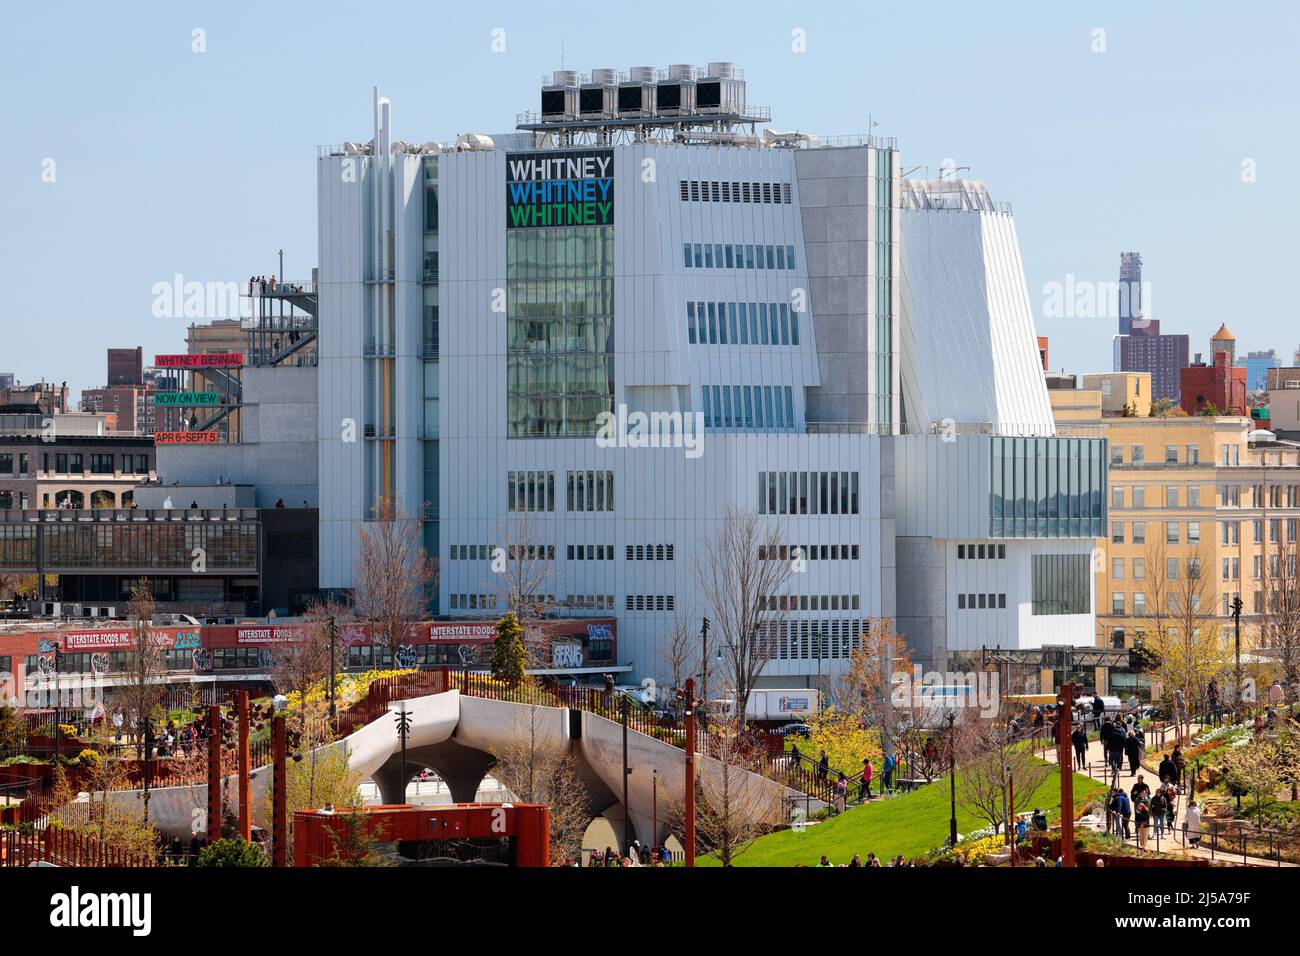 Whitney Museum of American Art, 99 Gansevoort St, New York, NY. A contemporary art museum with Little Island pier 55 park in the foreground. Stock Photo